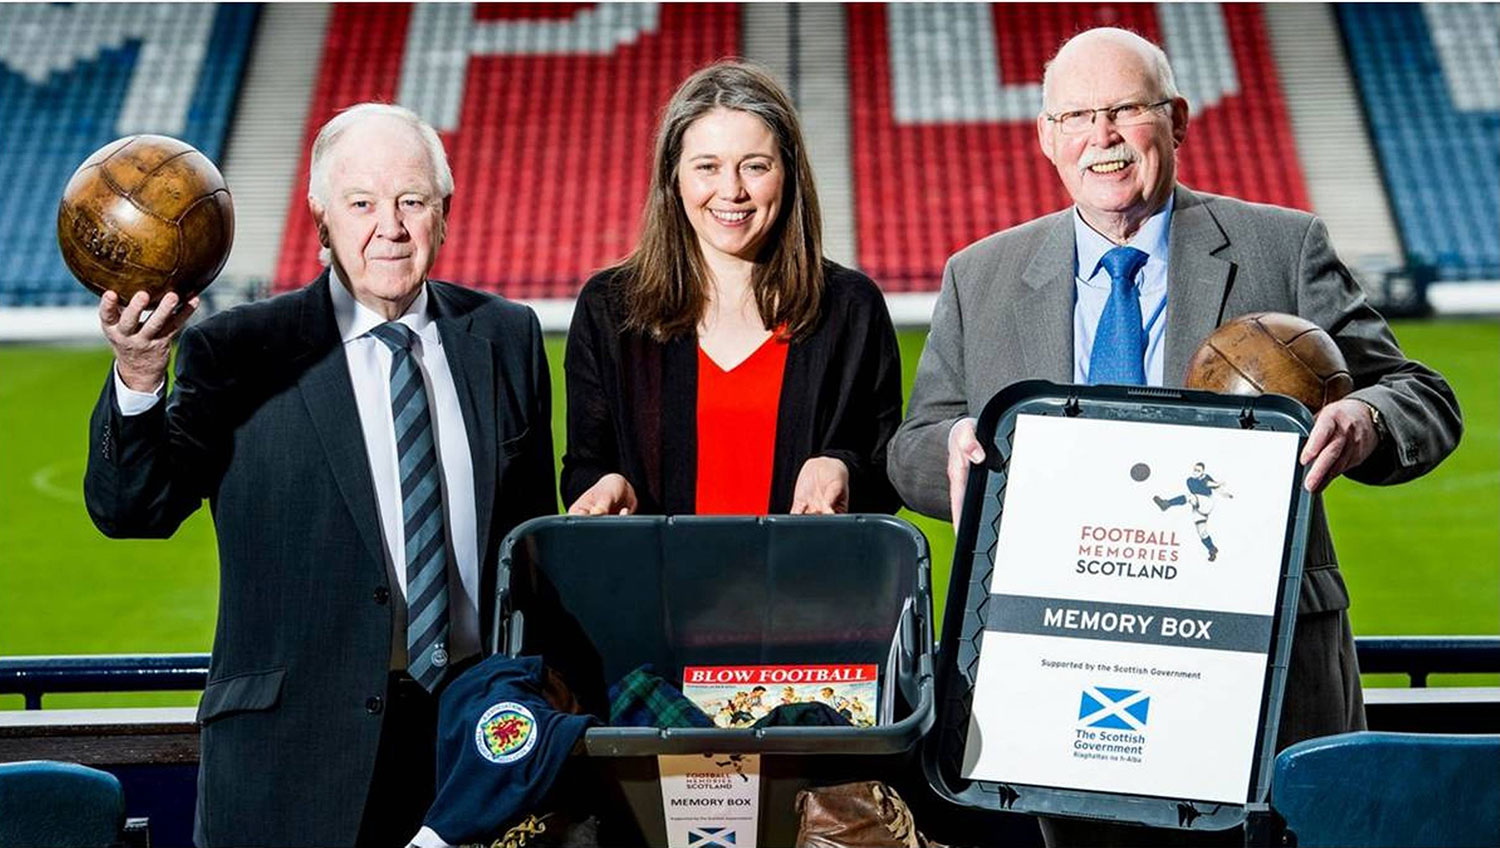 Aileen Campbell MSP, Minister for Public Health and Sport launches the Memory Box project with Craig Brown (Football Memories Ambassador) and Robert Craig, Chair of the Scottish Football Museum